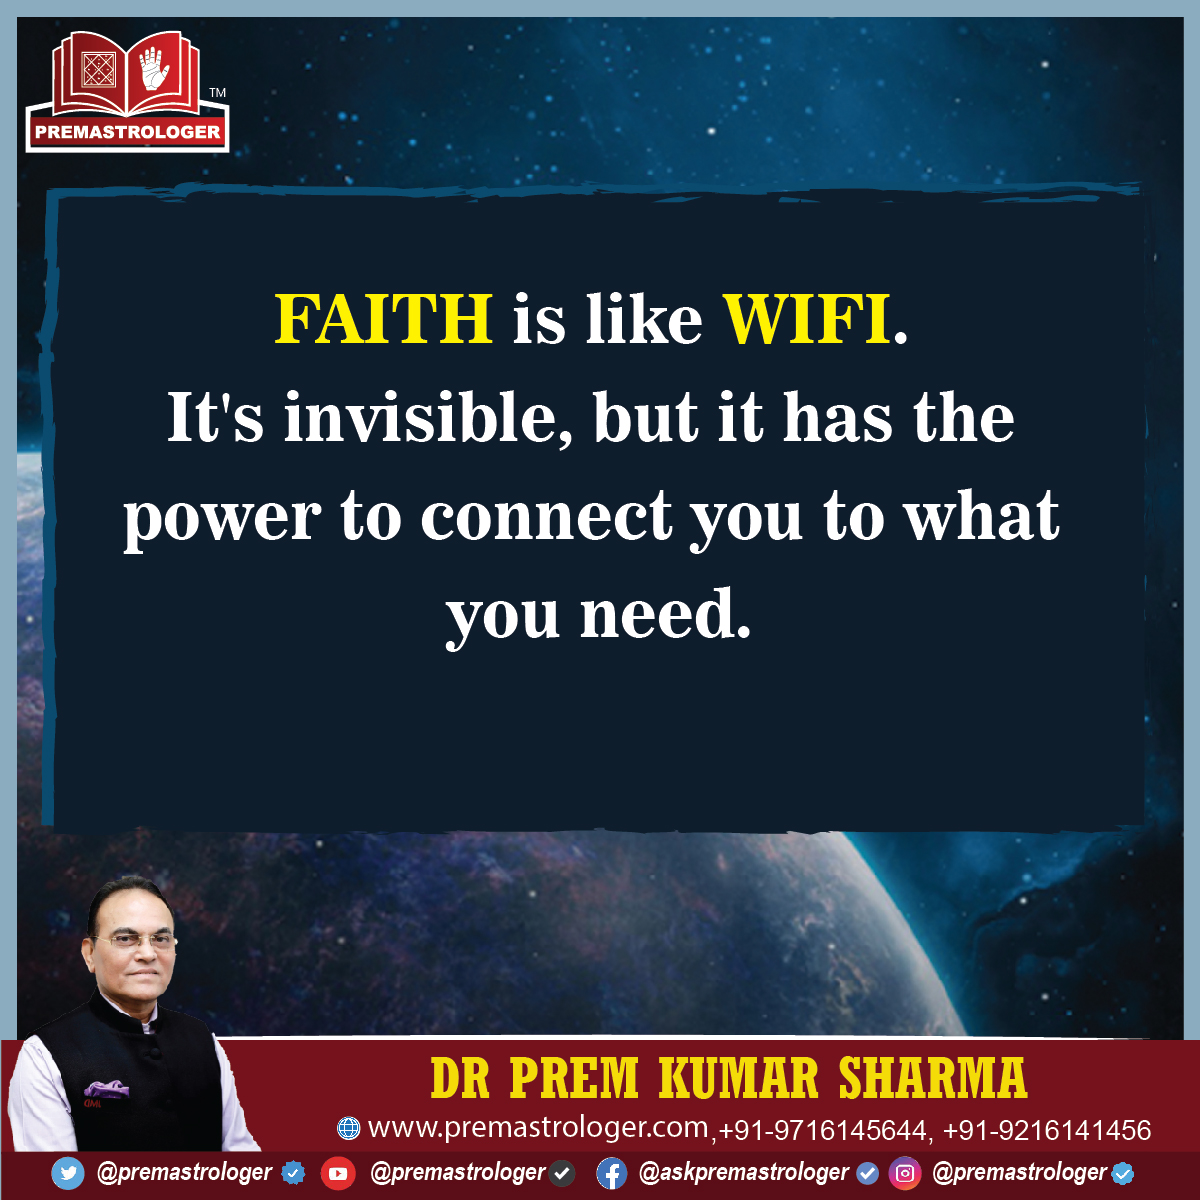 'FAITH is like WIFI. It's invisible, but it has the power to connect you to what you need.'

#GoodmorningTwitter
#सुप्रभात
#Wednesdaymorninglive
#WednesdayVibes
#Wednesdaymotivations
#Wednesdaymorning
#WednesdayThoughts